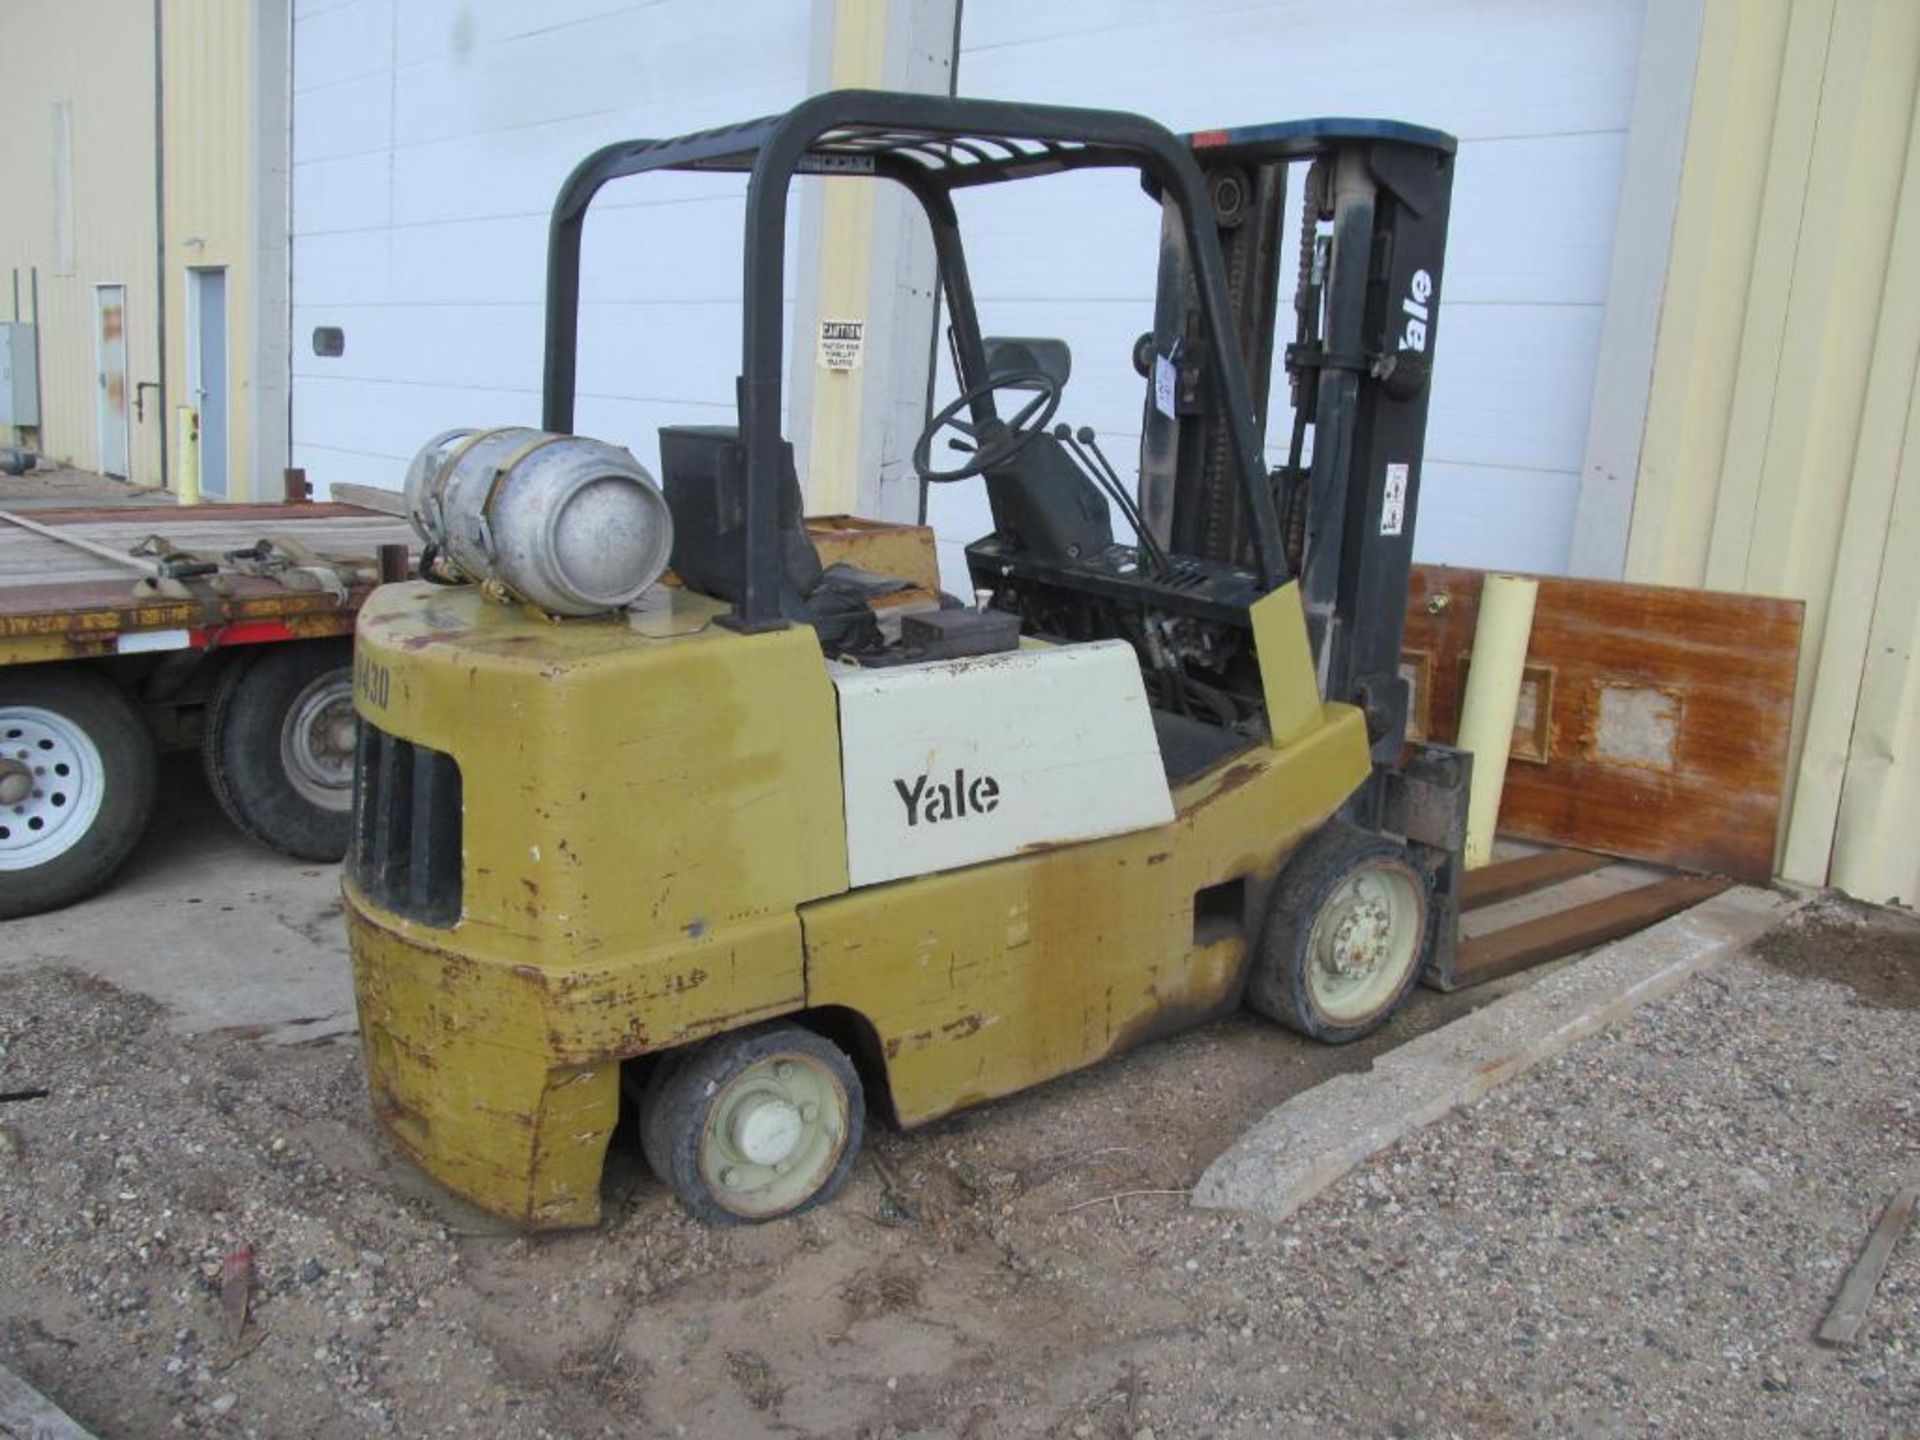 Yale GLC08LCJSBE085 8,000-Lb LPG Forklift, S/N 11404689, 185" Lift, 60" Forks, Needs Repairs - Image 2 of 3